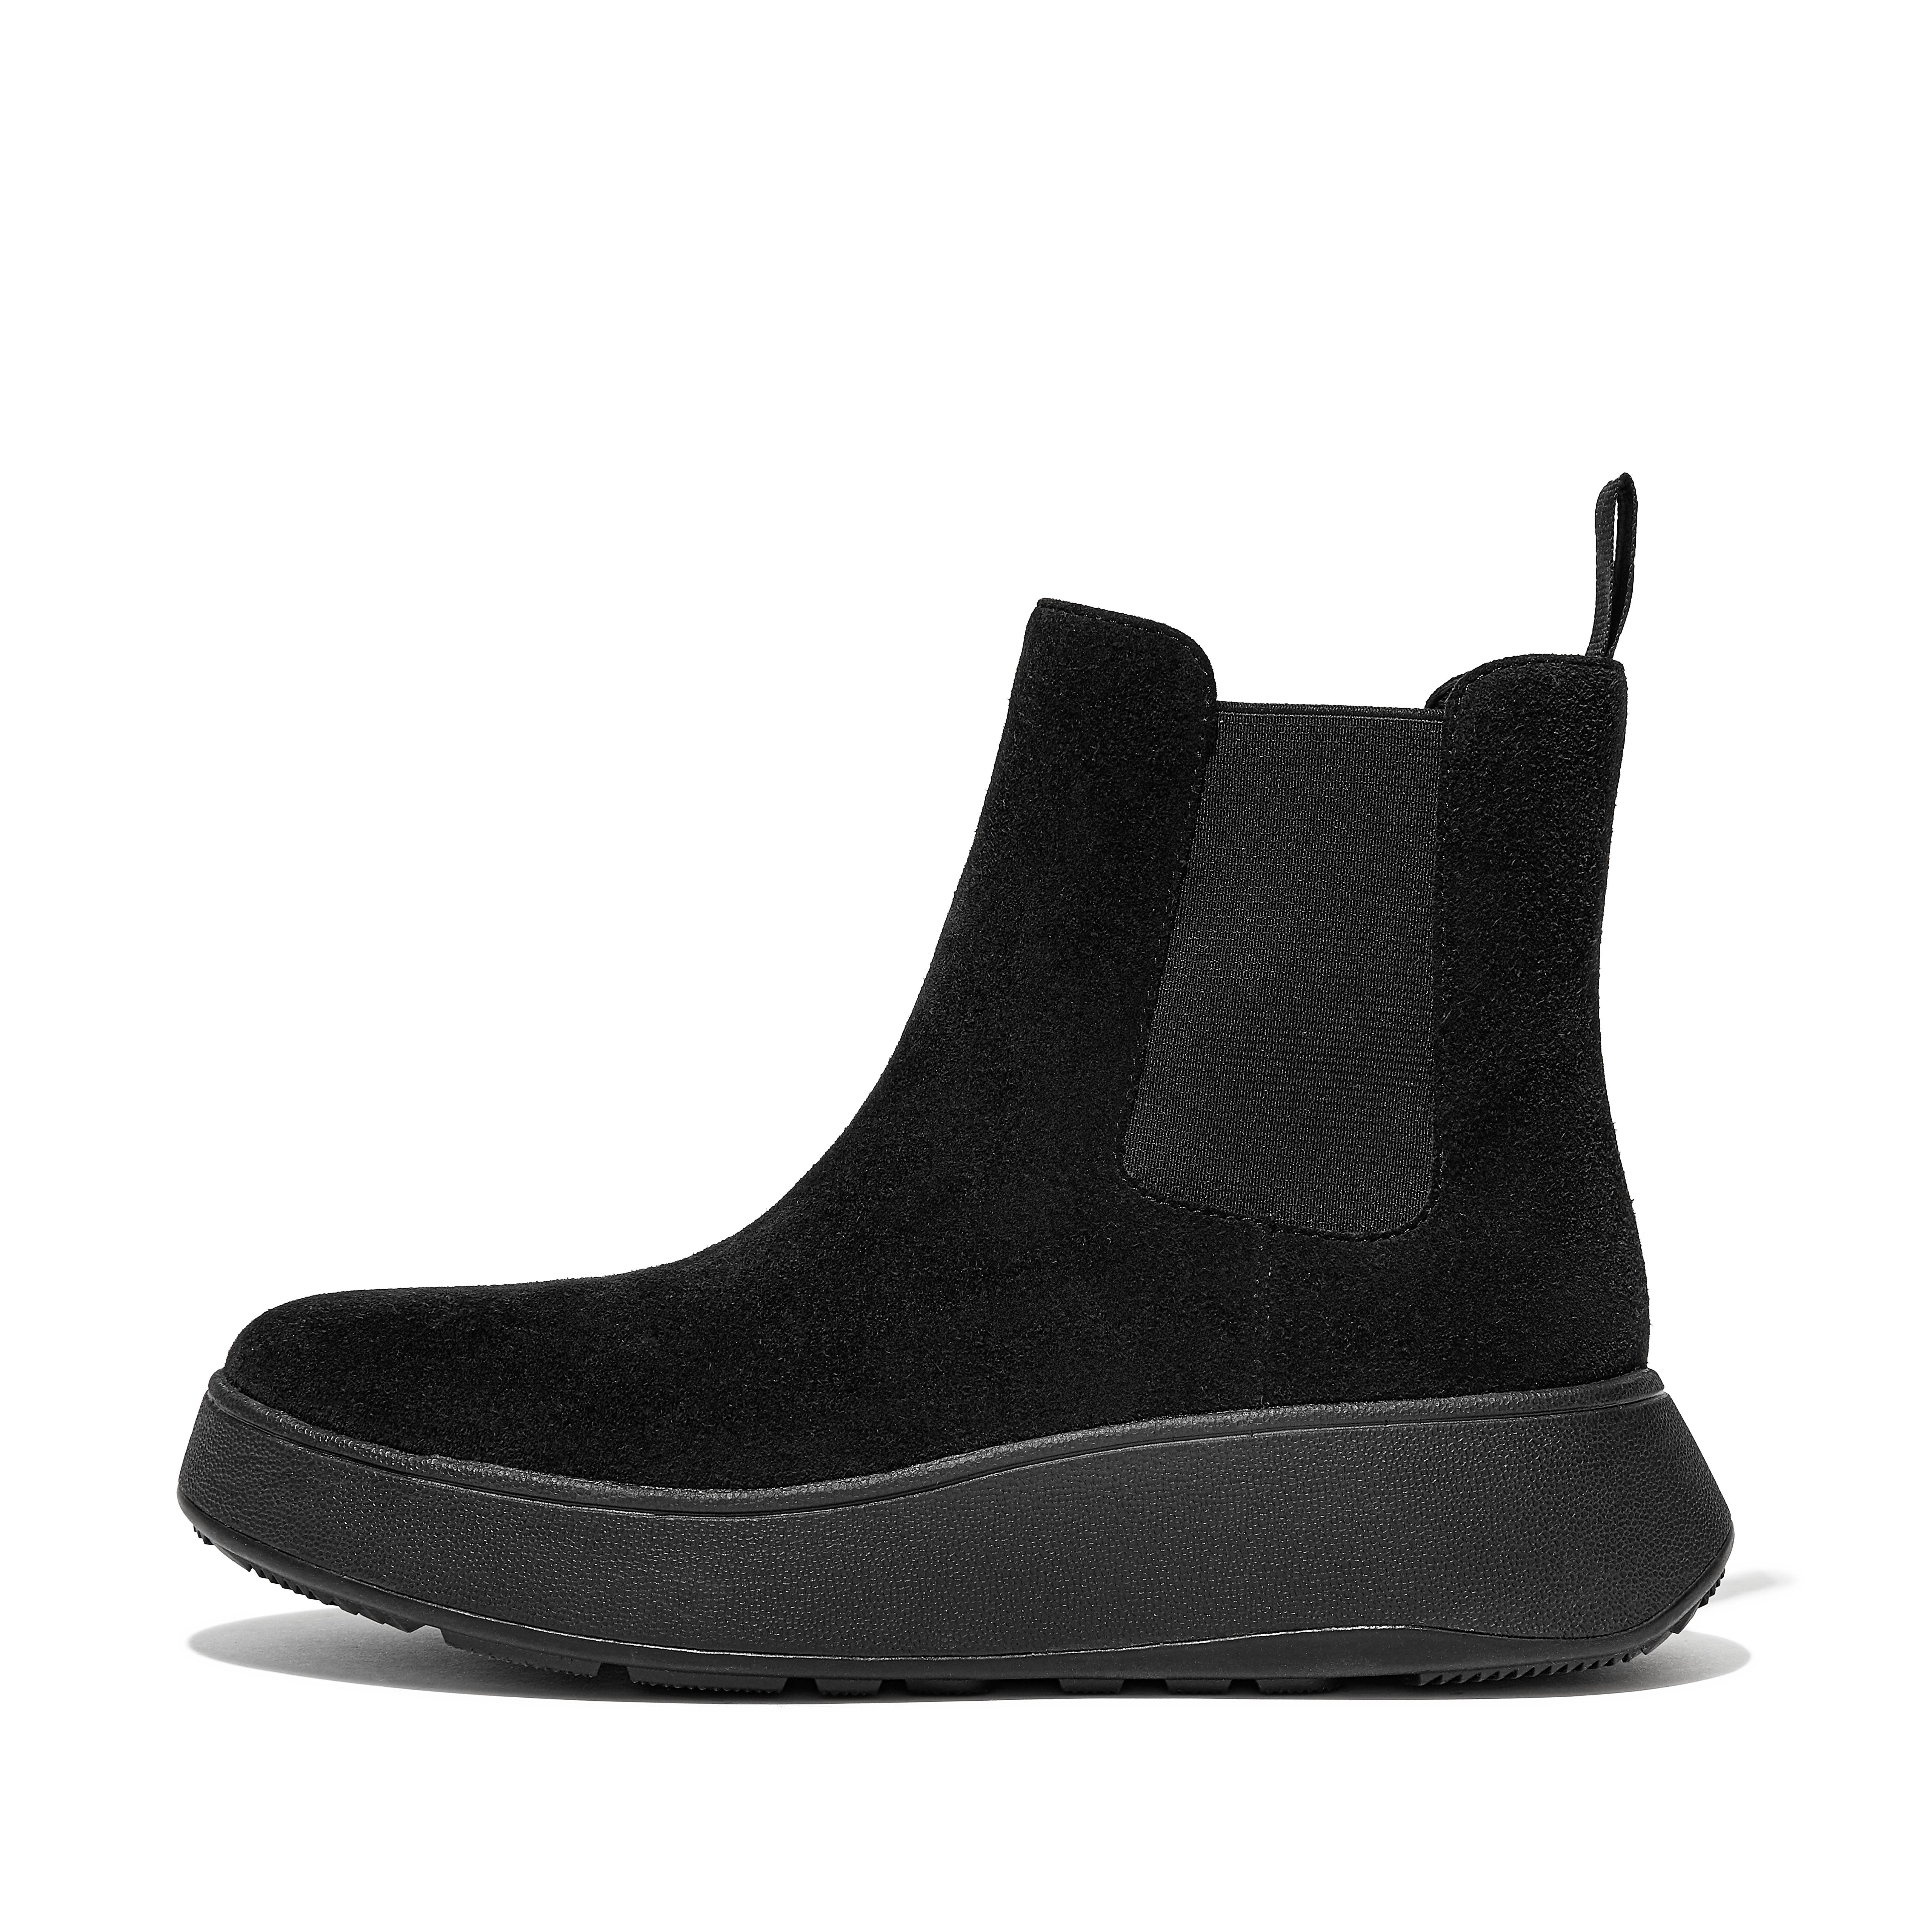 Fitflop Suede Flatform Chelsea Boots,All Black